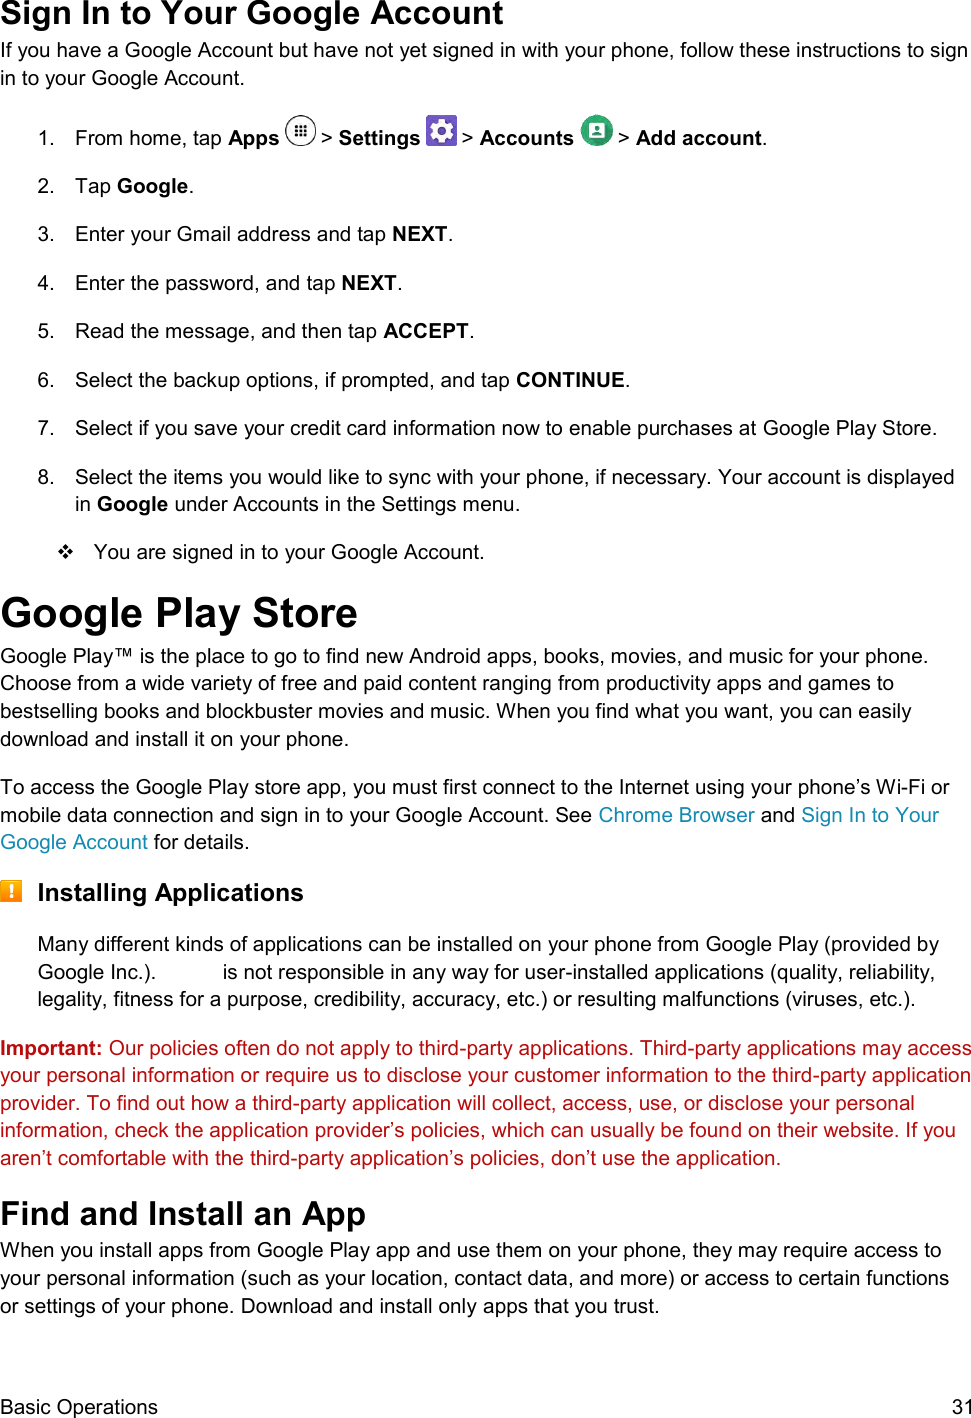  Basic Operations  31 Sign In to Your Google Account If you have a Google Account but have not yet signed in with your phone, follow these instructions to sign in to your Google Account. 1.  From home, tap Apps   &gt; Settings   &gt; Accounts   &gt; Add account.  2.  Tap Google.  3.  Enter your Gmail address and tap NEXT.  4.  Enter the password, and tap NEXT. 5.  Read the message, and then tap ACCEPT. 6.  Select the backup options, if prompted, and tap CONTINUE. 7.  Select if you save your credit card information now to enable purchases at Google Play Store. 8.  Select the items you would like to sync with your phone, if necessary. Your account is displayed in Google under Accounts in the Settings menu.   You are signed in to your Google Account. Google Play Store  Google Play™ is the place to go to find new Android apps, books, movies, and music for your phone. Choose from a wide variety of free and paid content ranging from productivity apps and games to bestselling books and blockbuster movies and music. When you find what you want, you can easily download and install it on your phone. To access the Google Play store app, you must first connect to the Internet using your phone’s Wi-Fi or mobile data connection and sign in to your Google Account. See Chrome Browser and Sign In to Your Google Account for details.  Installing Applications Many different kinds of applications can be installed on your phone from Google Play (provided by Google Inc.).   is not responsible in any way for user-installed applications (quality, reliability, legality, fitness for a purpose, credibility, accuracy, etc.) or resulting malfunctions (viruses, etc.). Important: Our policies often do not apply to third-party applications. Third-party applications may access your personal information or require us to disclose your customer information to the third-party application provider. To find out how a third-party application will collect, access, use, or disclose your personal information, check the application provider’s policies, which can usually be found on their website. If you aren’t comfortable with the third-party application’s policies, don’t use the application. Find and Install an App When you install apps from Google Play app and use them on your phone, they may require access to your personal information (such as your location, contact data, and more) or access to certain functions or settings of your phone. Download and install only apps that you trust. 